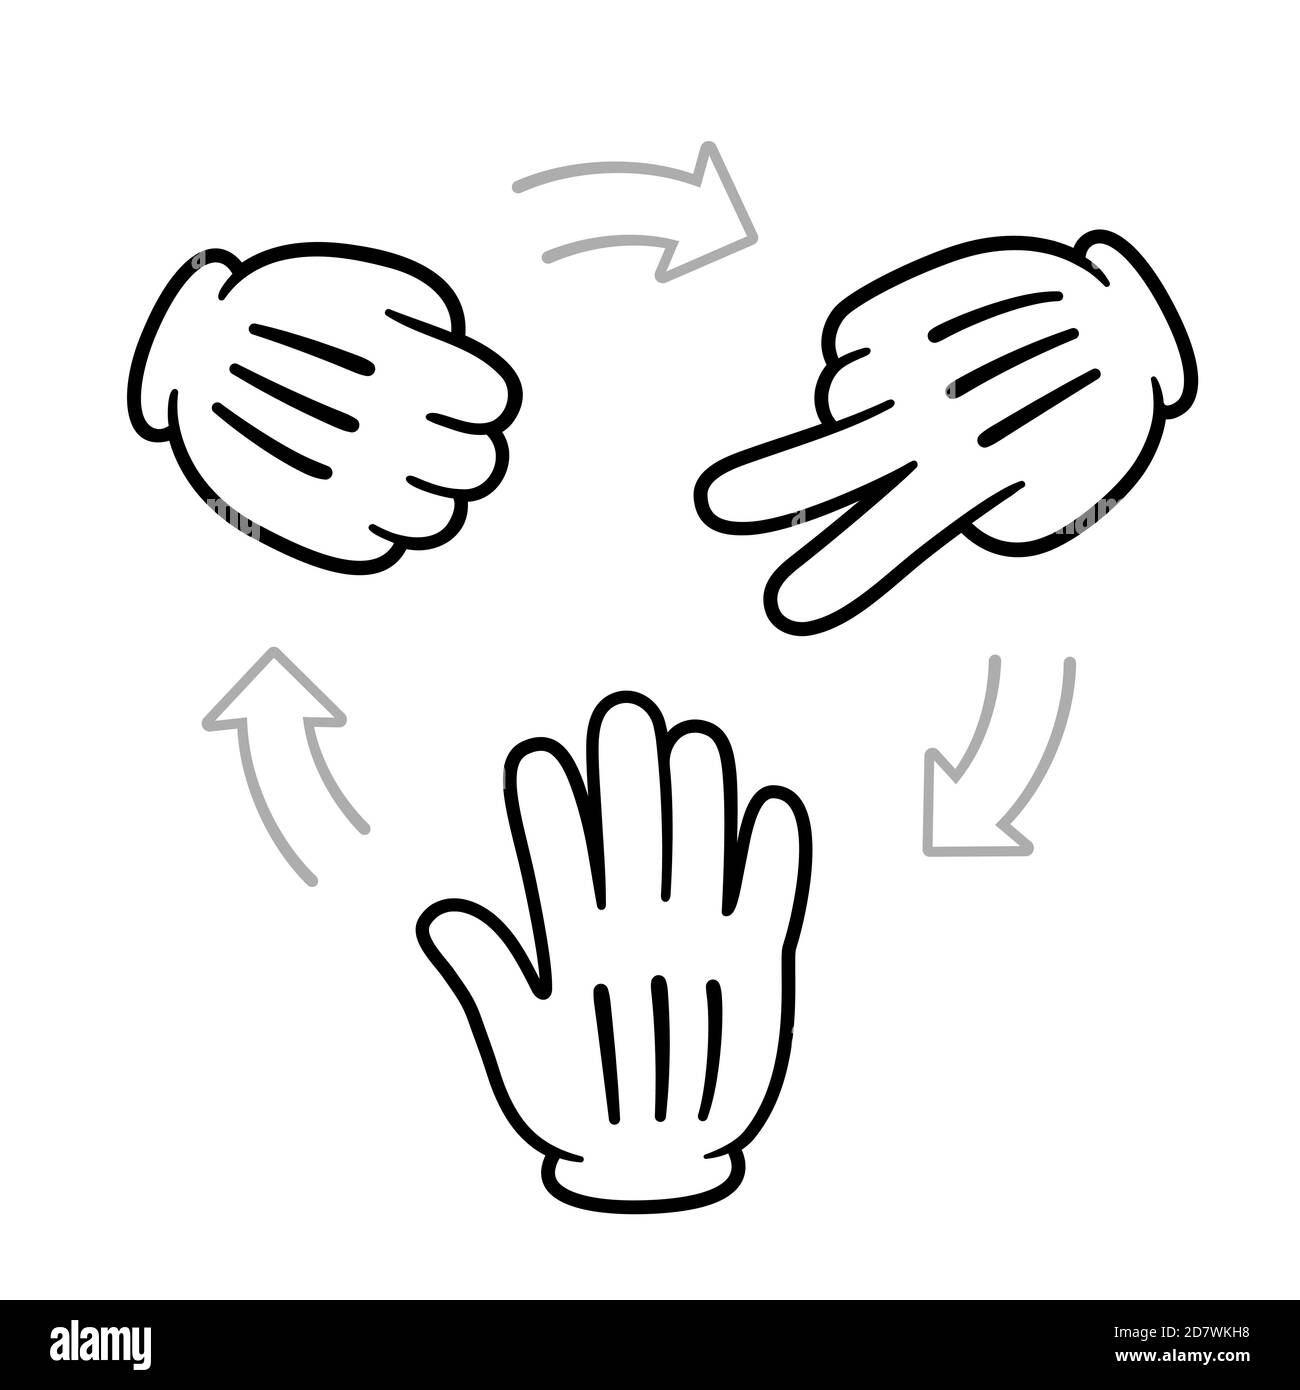 Rock Paper Scissors game diagram. Hand icons with arrows showing which gesture wins. Cartoon glove drawing, vector clip art illustration. Stock Vector